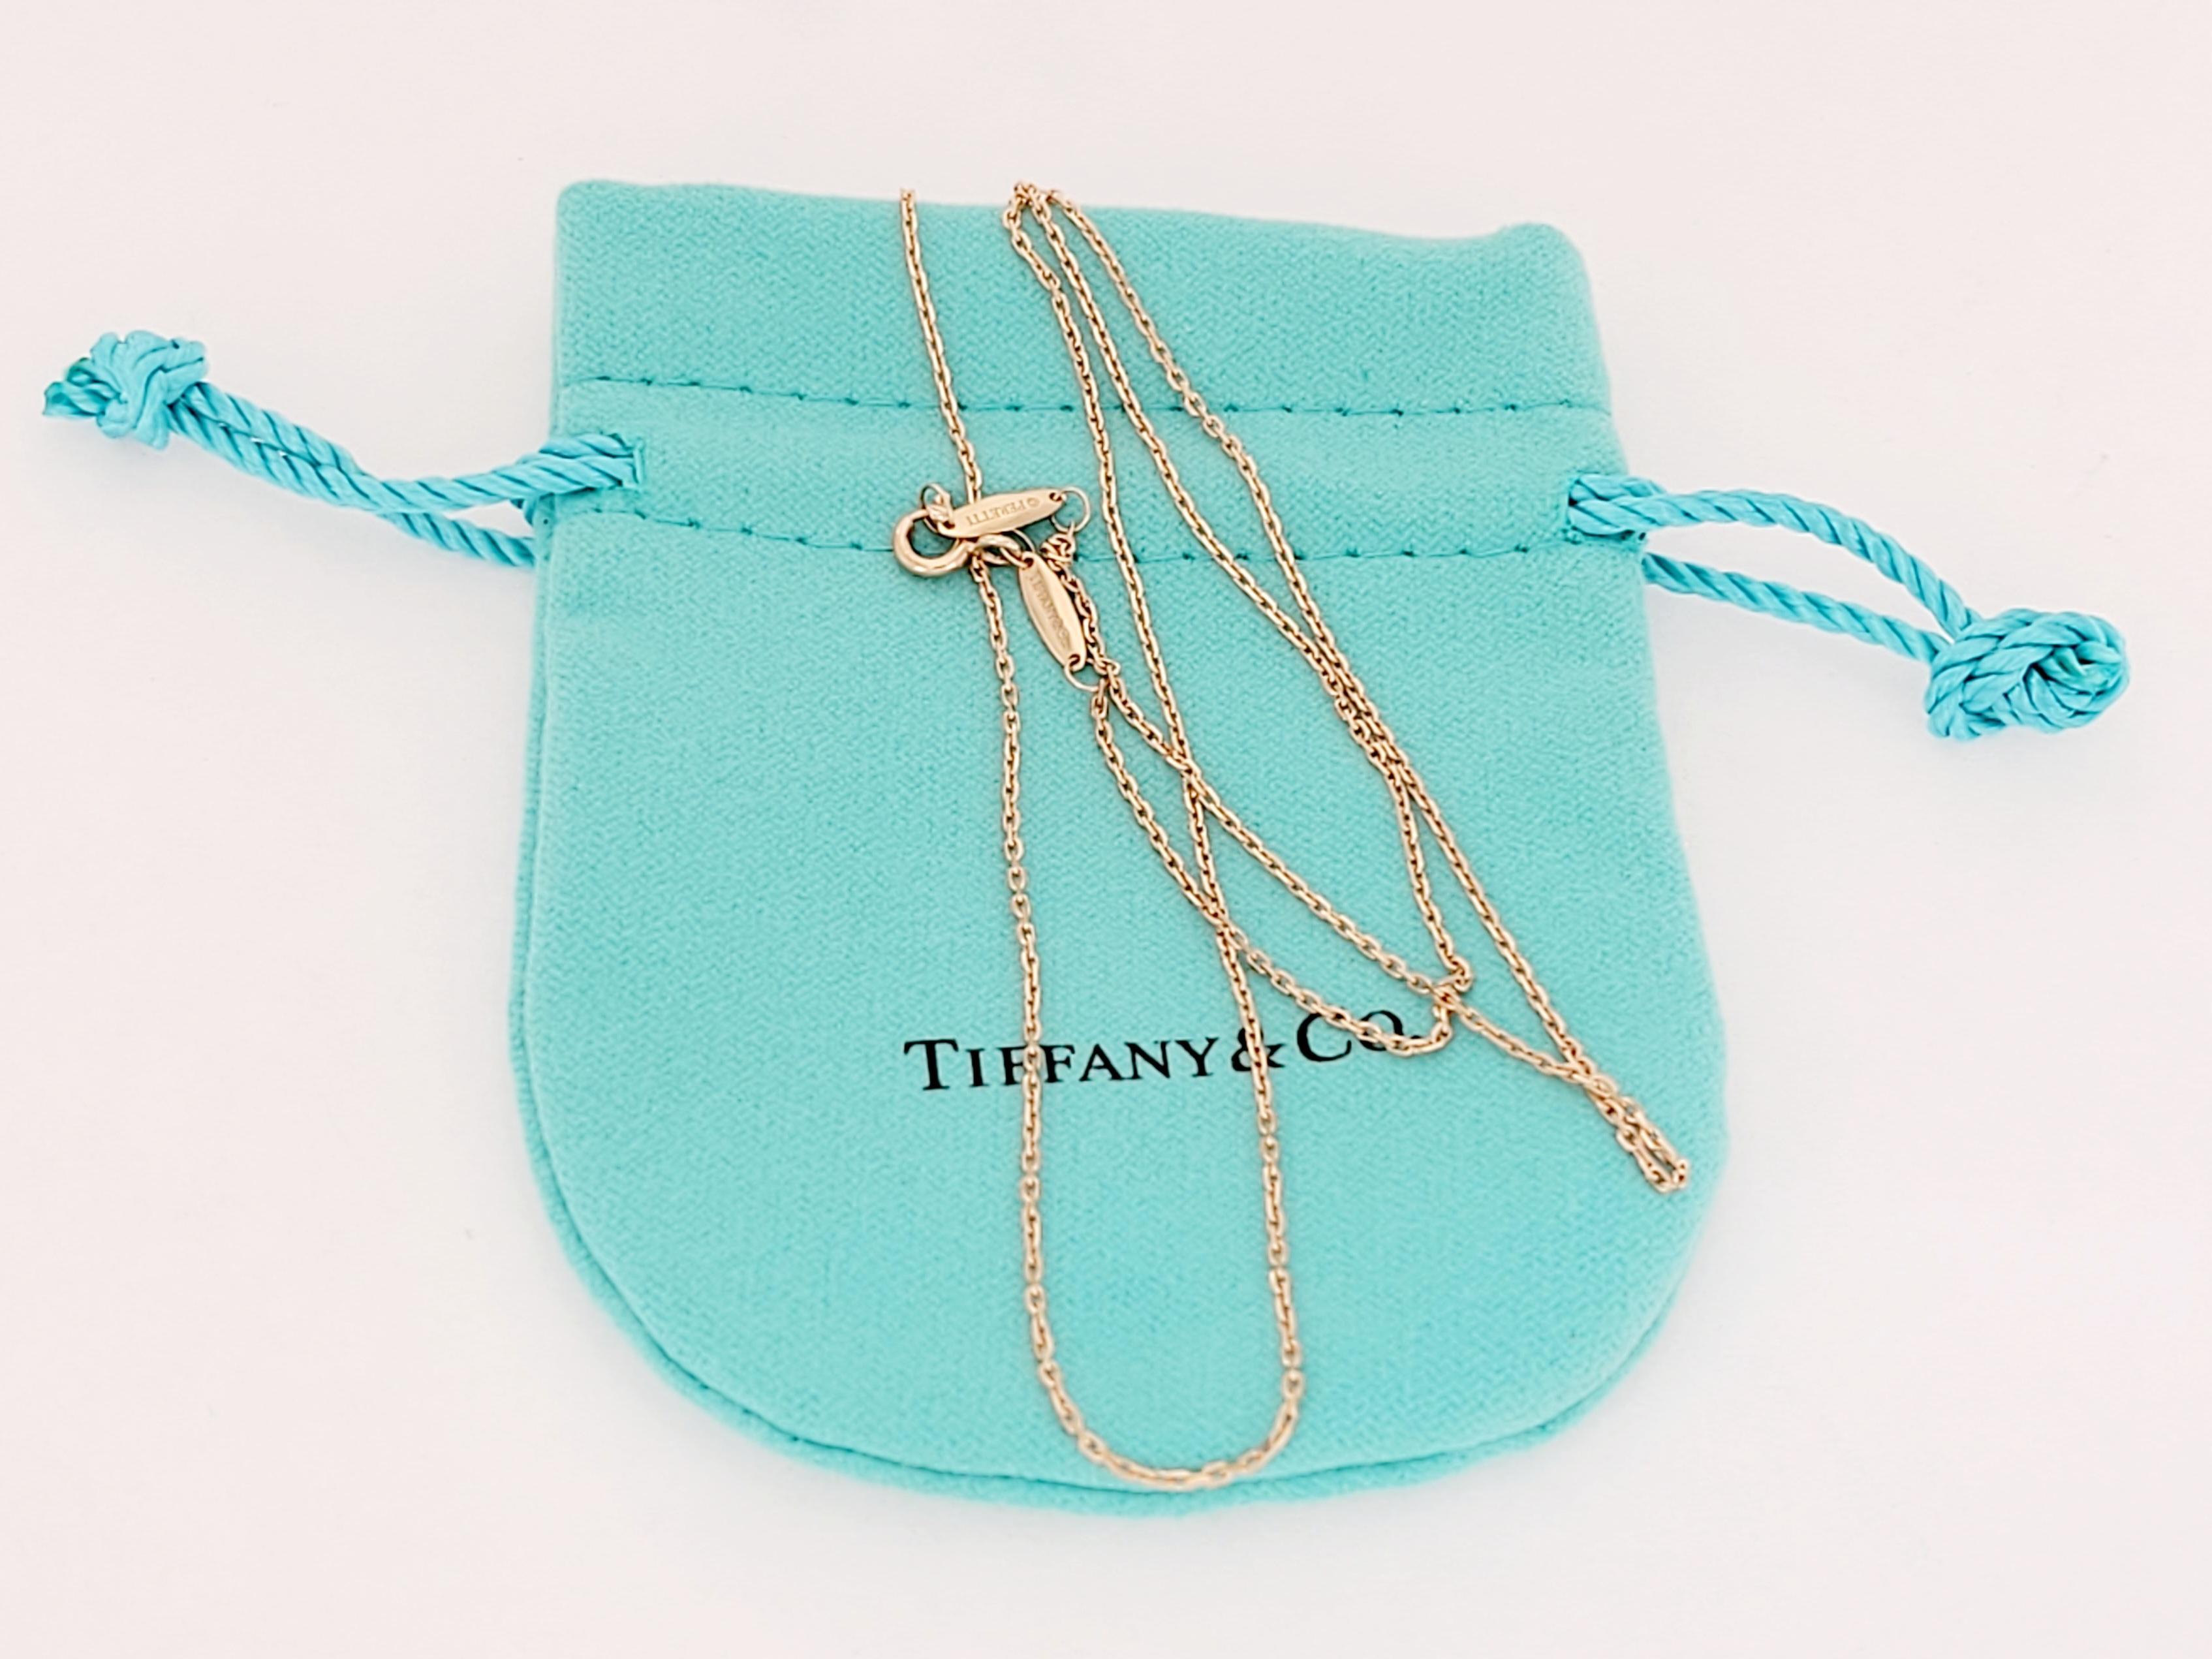 Brand Tiffany & co
Condition never worn
Gender Women  
18K Rose Gold
Chain length 20''
Thickness 1mm
Weight 2.4gr 
Retail Price $620
Comes with Tiffany & co pouch

